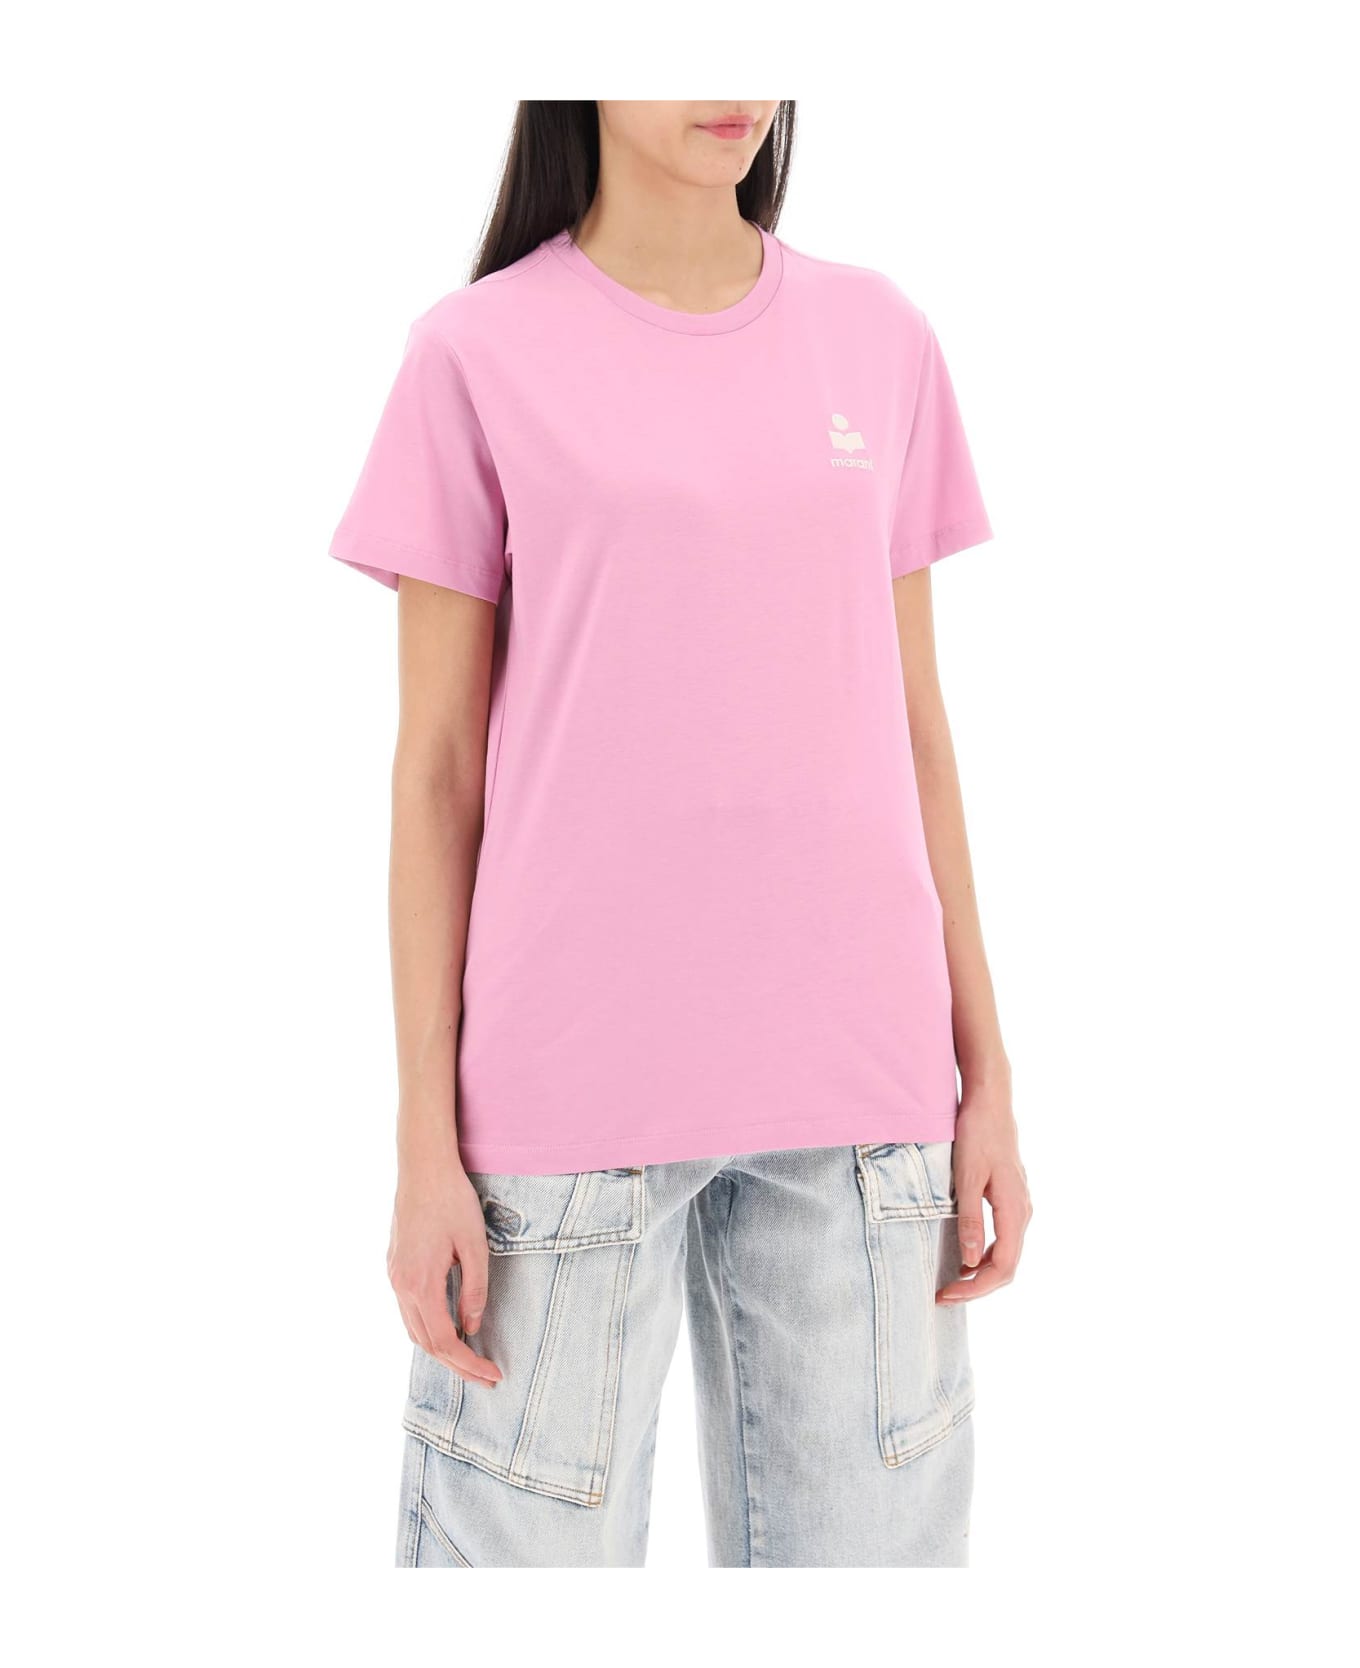 Marant Étoile Aby Regular Fit T-shirt - Candy Pink Tシャツ